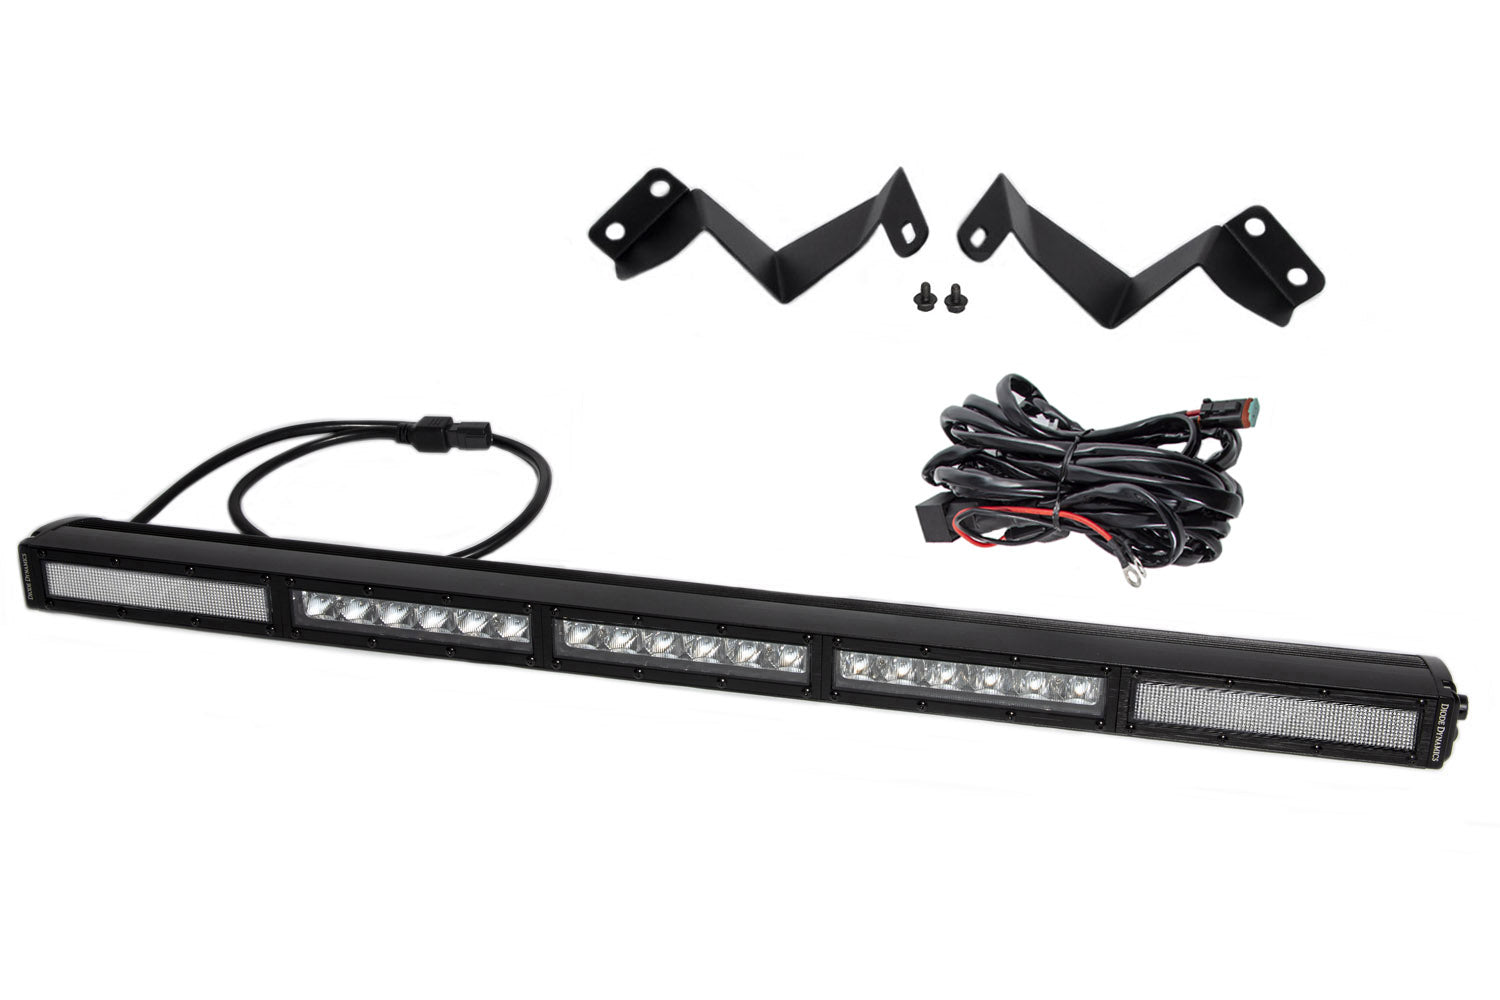 Diode Dynamics 2016-2021 Toyota Tacoma White Combo Stage Series SS30 Stealth Lightbar Kit DD6072